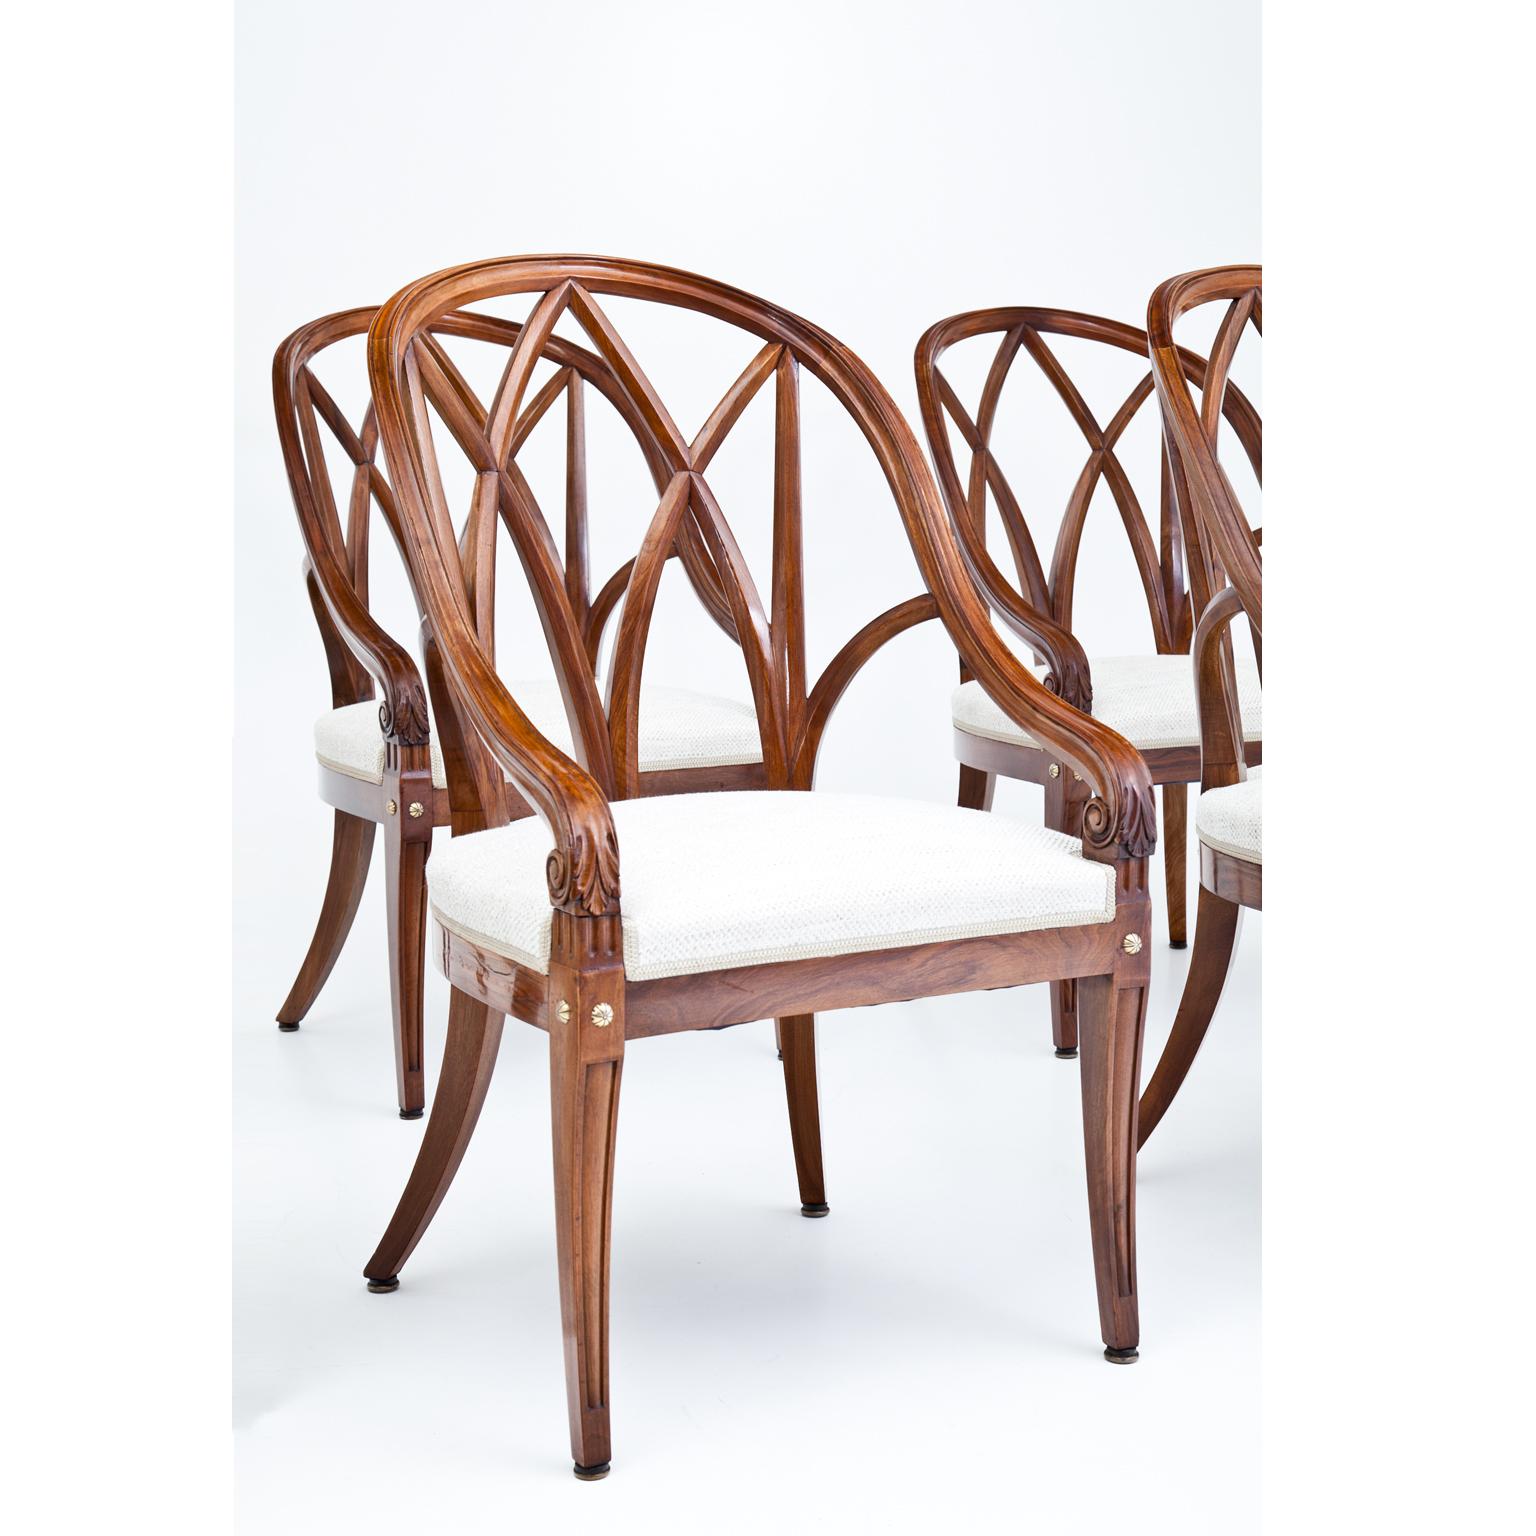 Early 20th Century Set of Four Solid Walnut Armchairs, France, circa 1910